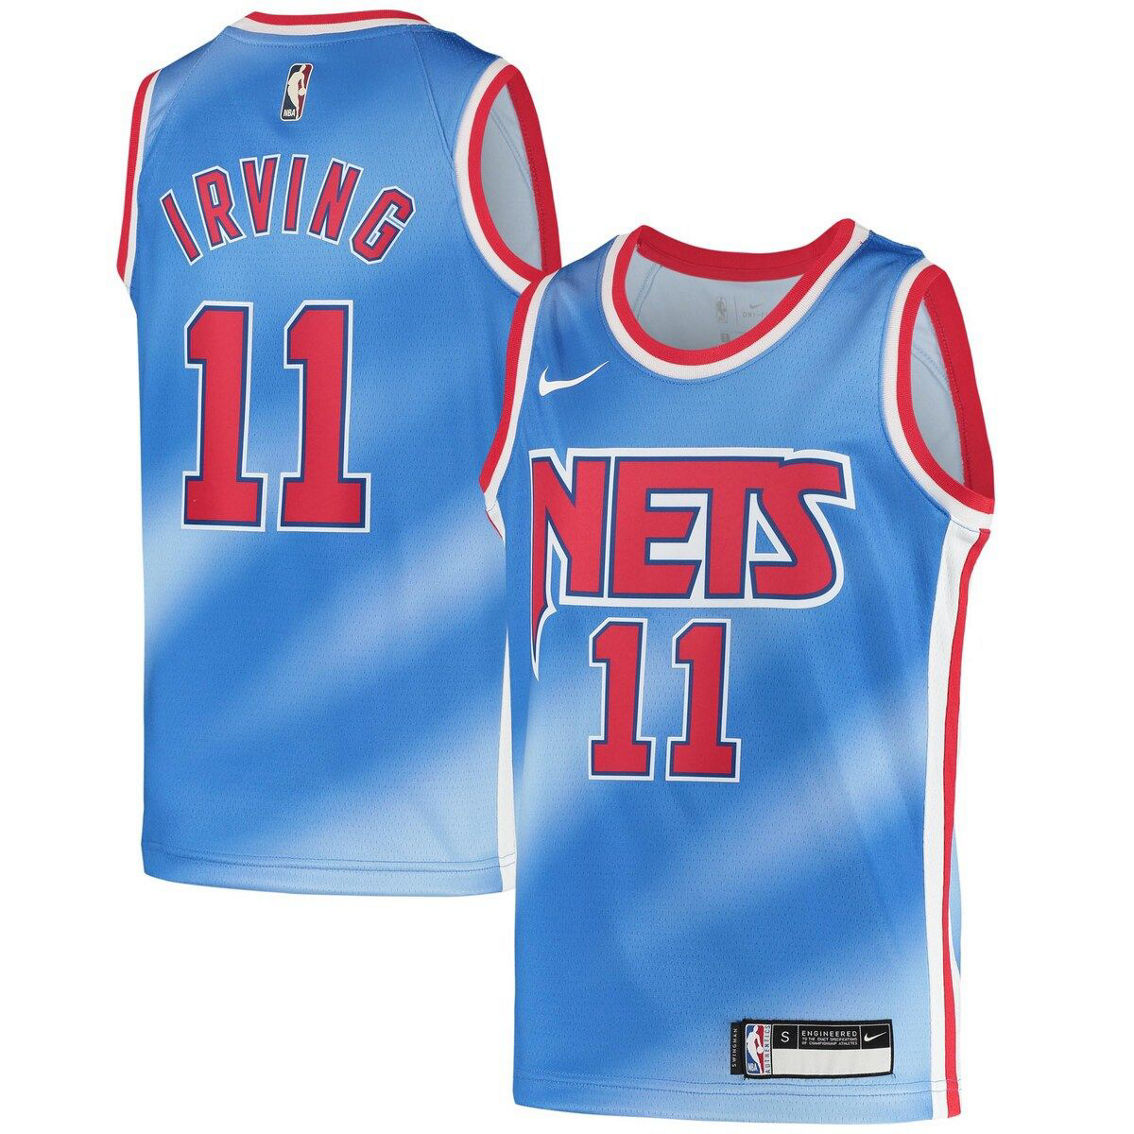 Nike Youth Kyrie Irving Light Blue Brooklyn Nets 2020/21 Jersey - Classic Edition - Image 2 of 4